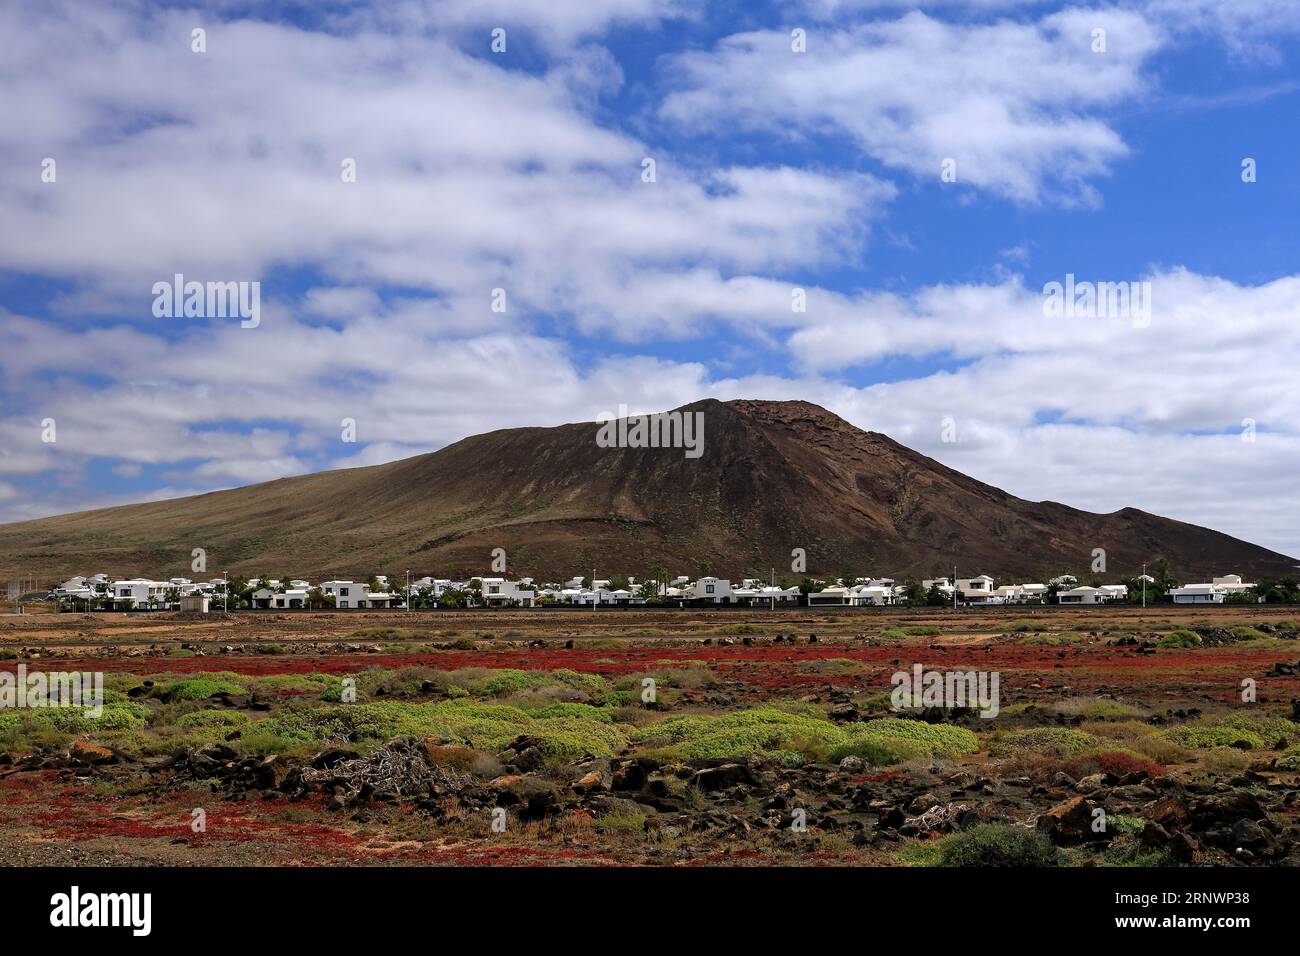 Colourful scenery and Montana Roja (Red Mountain) inactive volcano with small village at its base. Playa Blanca, Lanzarote, Canary Islands, Spain. Stock Photo